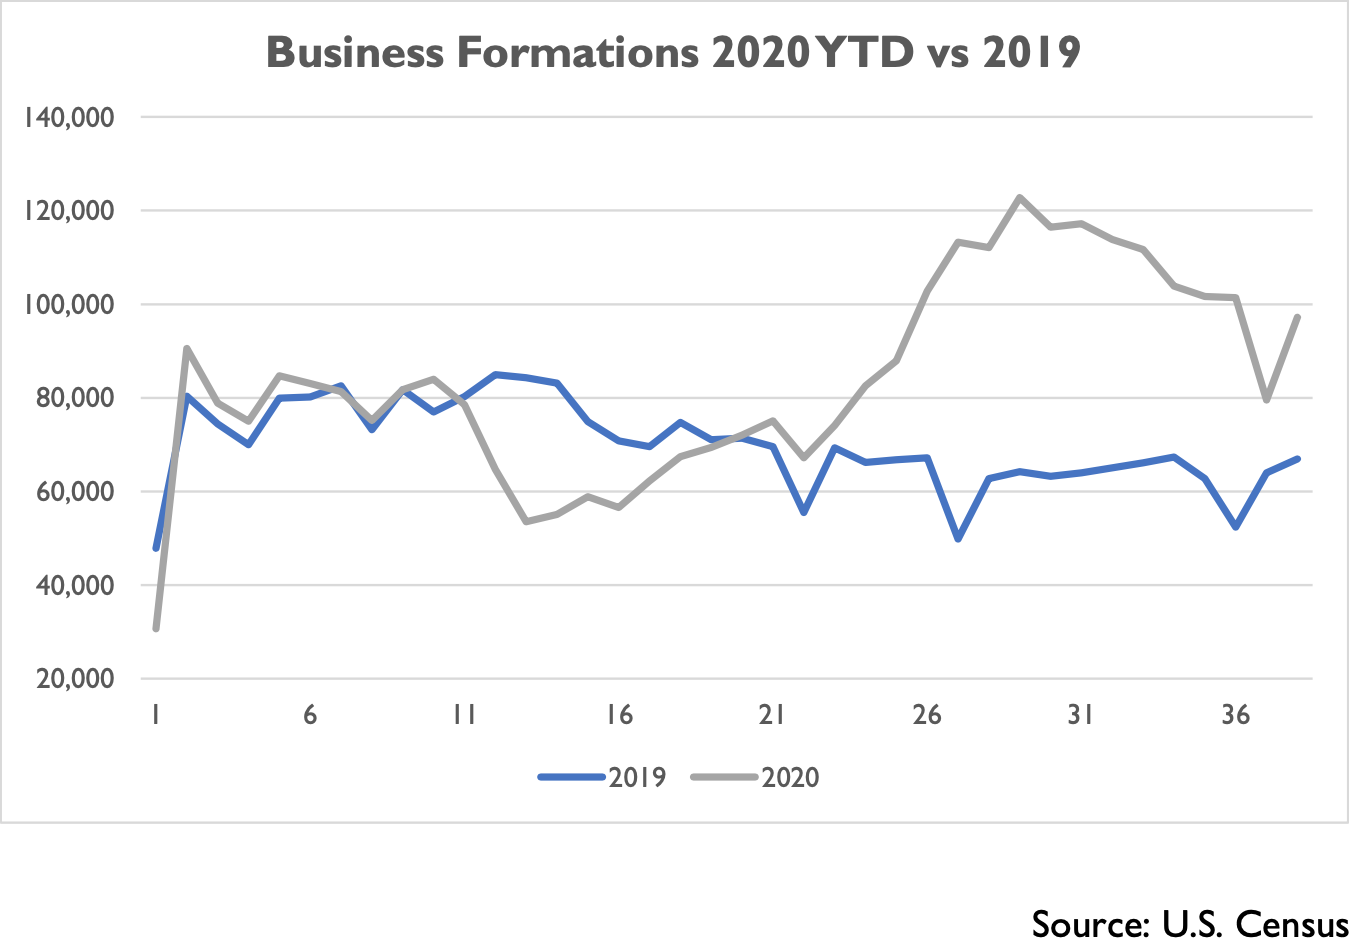 Chart - Business Formations 2020 YTD vs 2019 - Source: U.S. Census